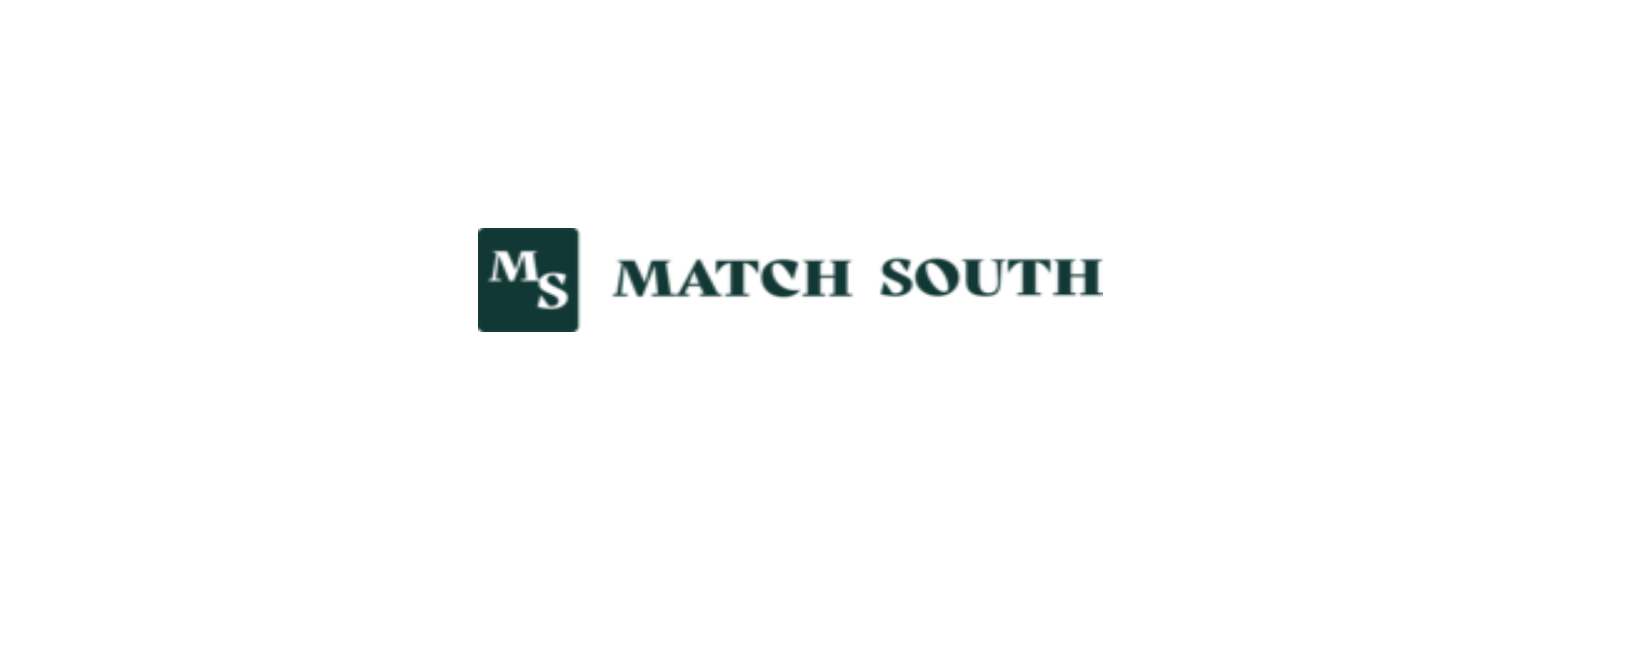 Match South Discount Code 2022